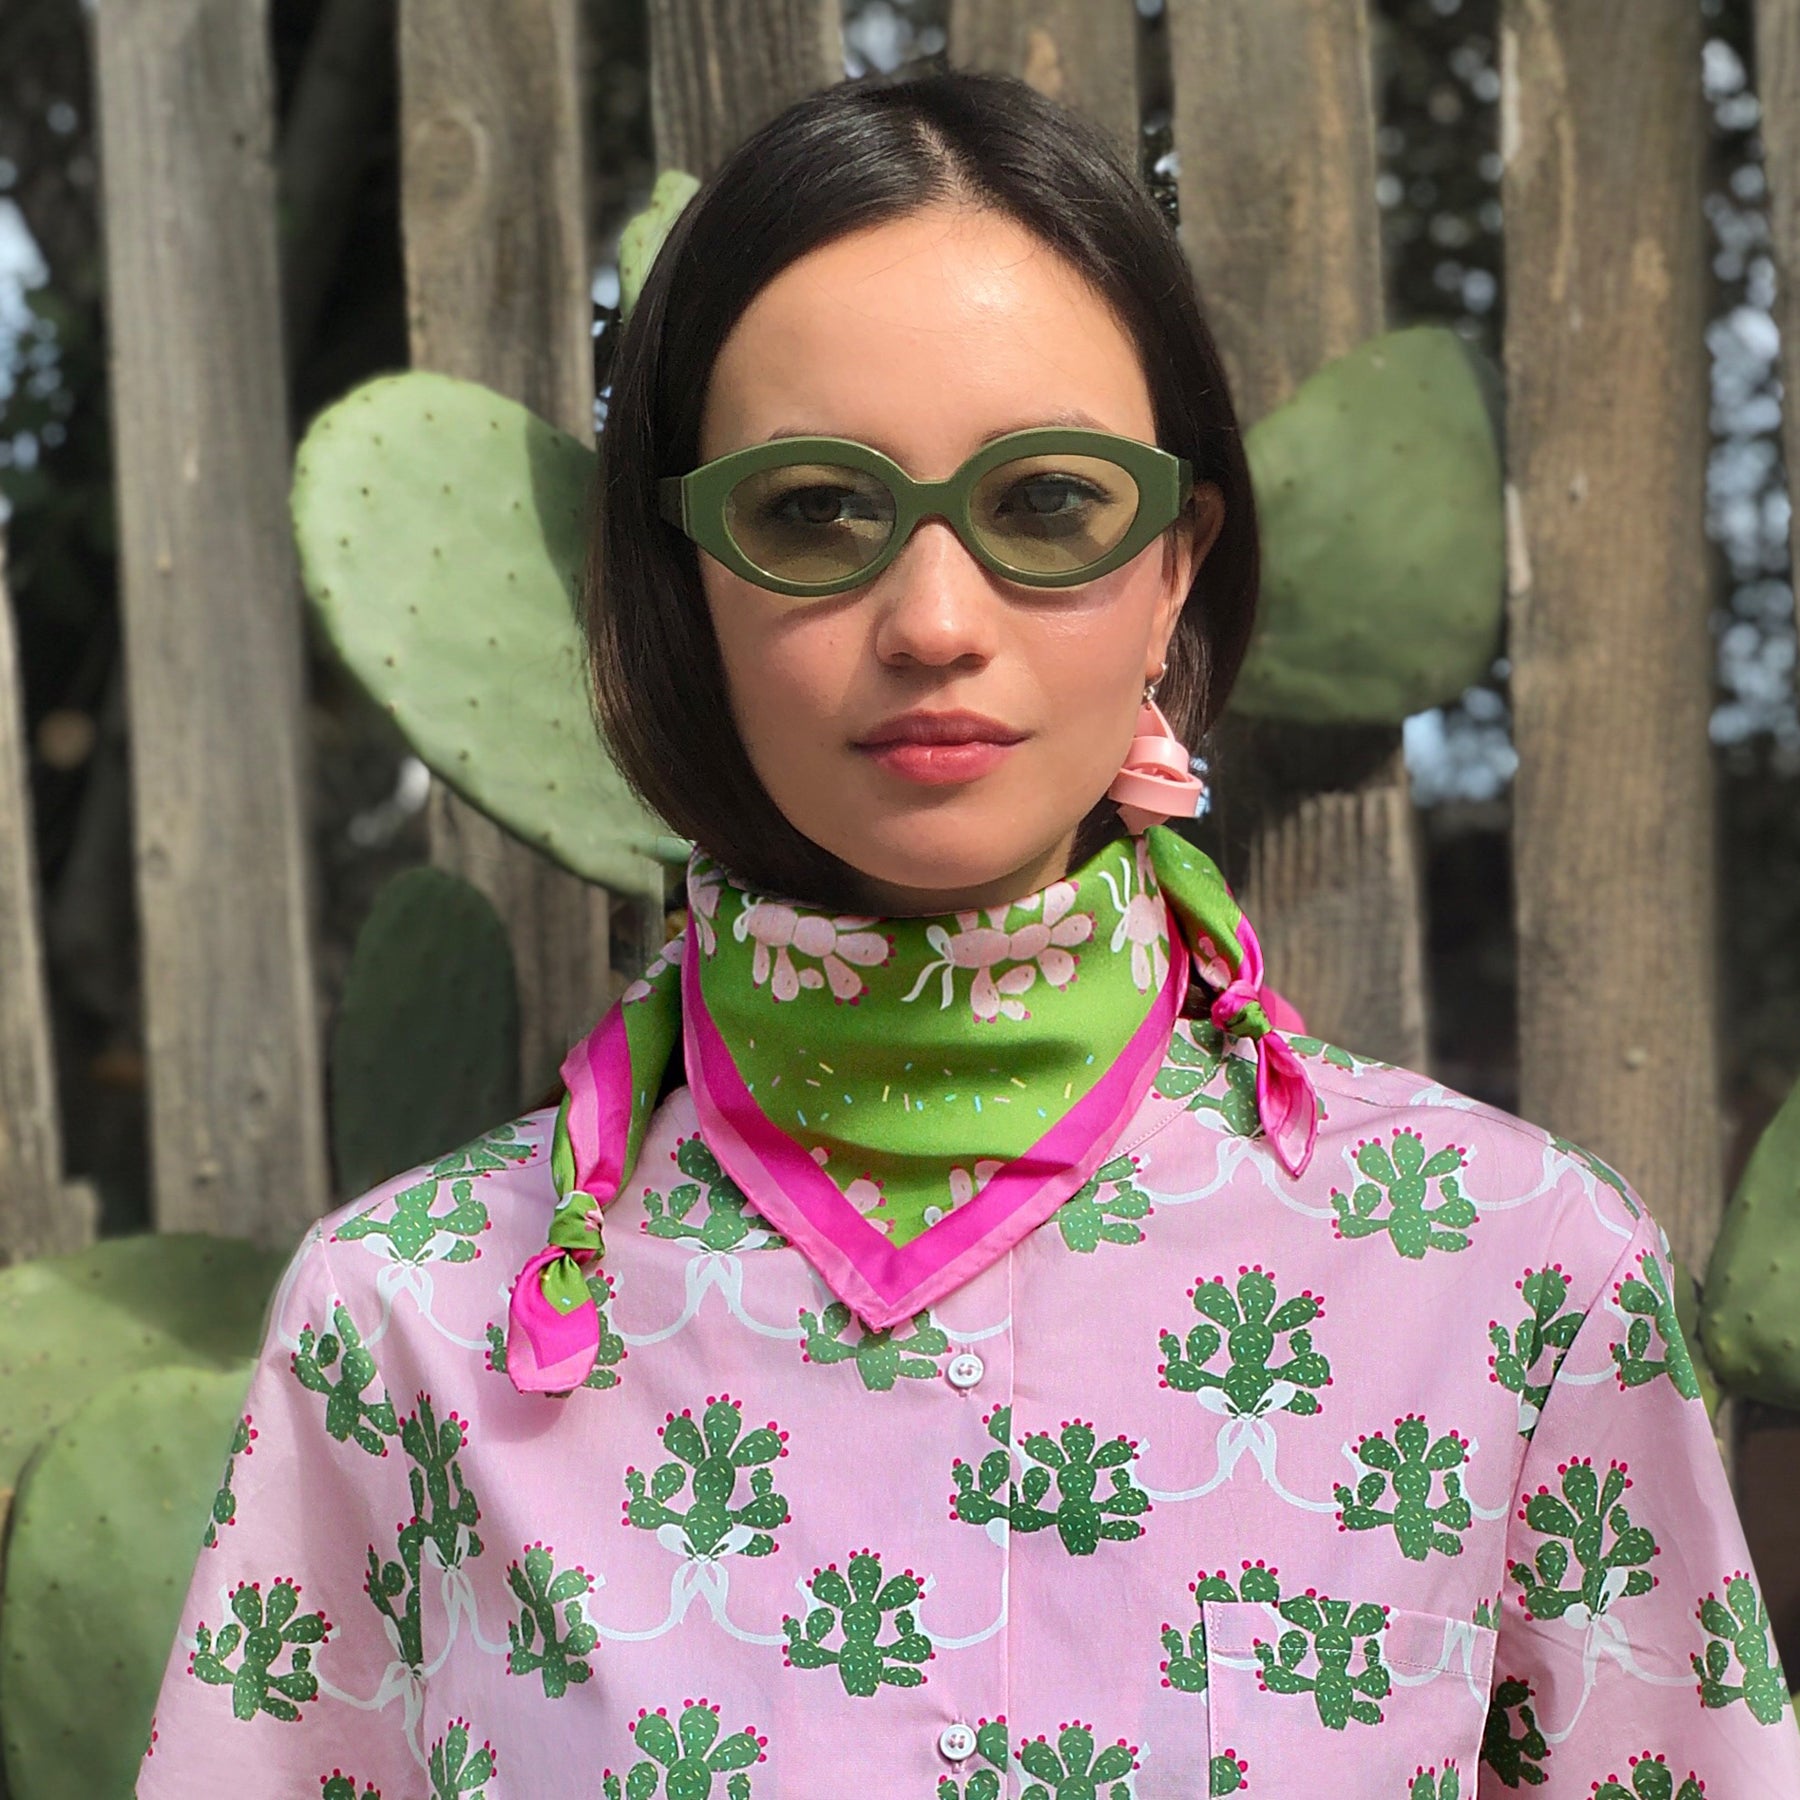 Set of green silk scarf with cacti and pink shirt with green cacti.